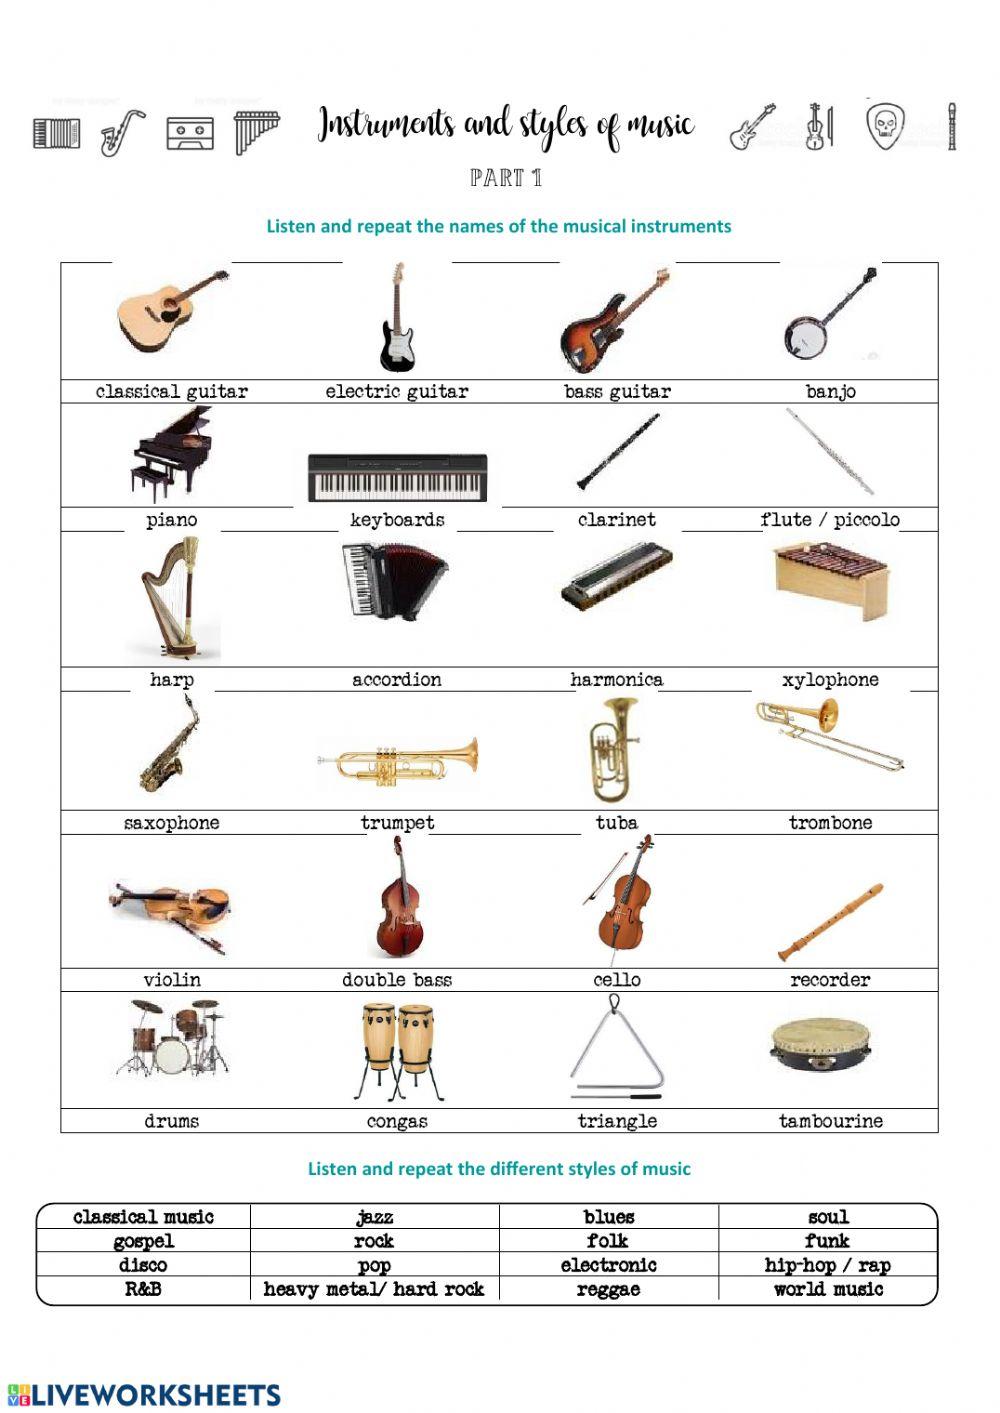 Musical instruments and styles (part 1)